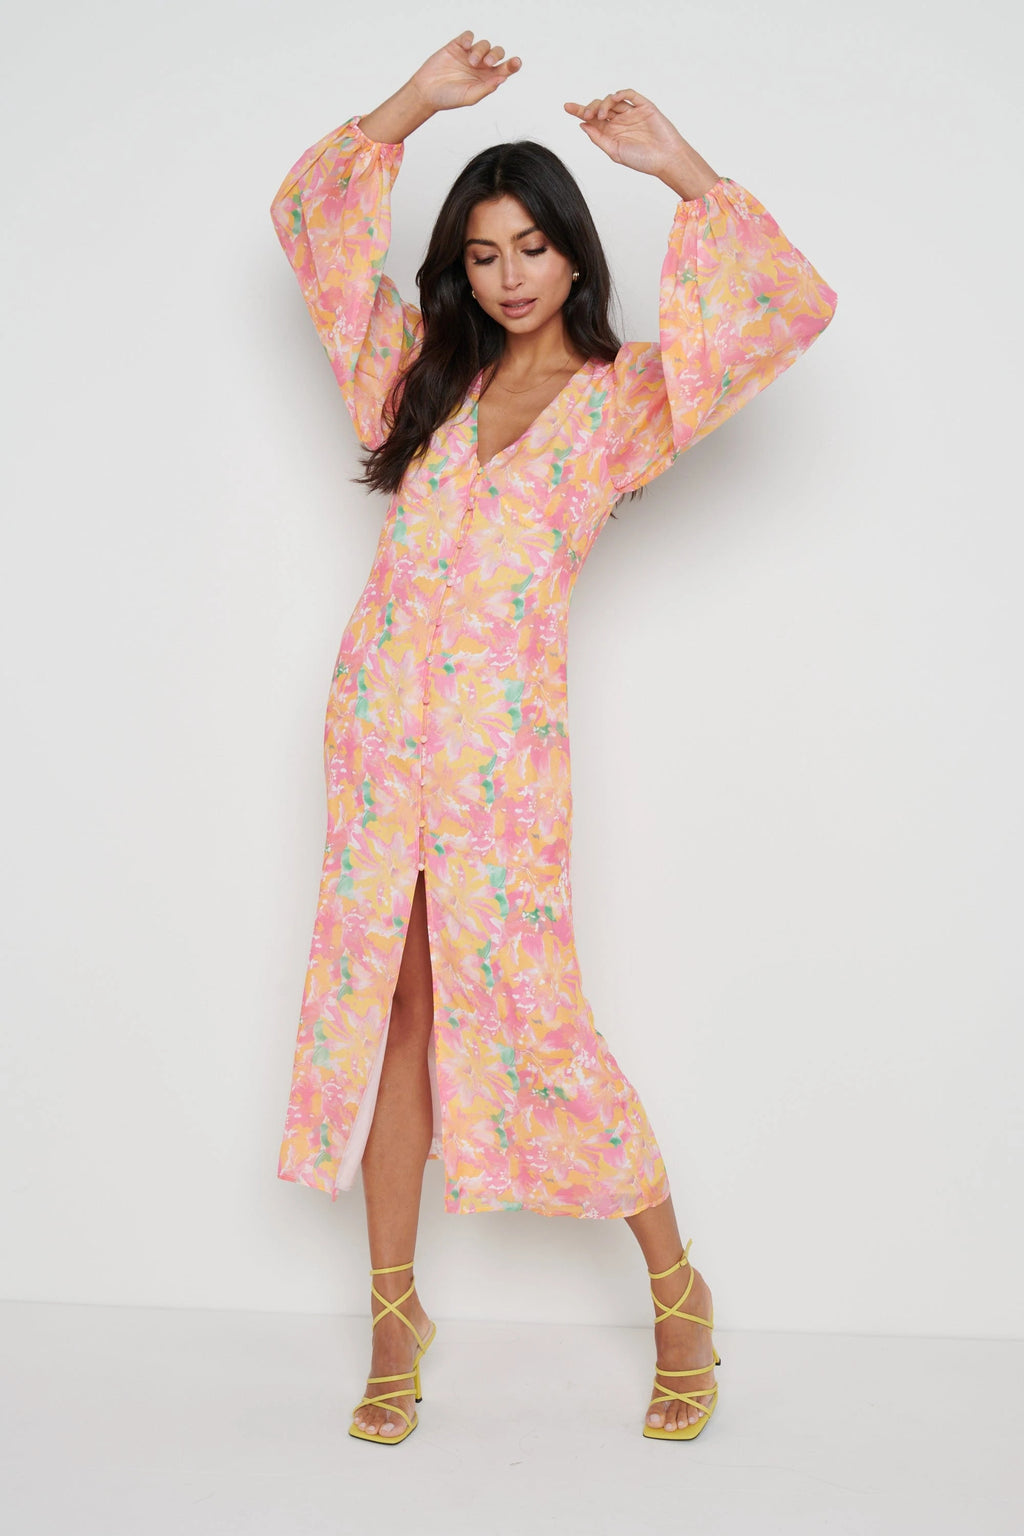 •Lightweight chiffon (100% polyester) •Balloon sleeve •middle slit •fabric covered button detailing •Lining in body •Elastic in sleeve head  Lygia is 5'9" and wears a size 8